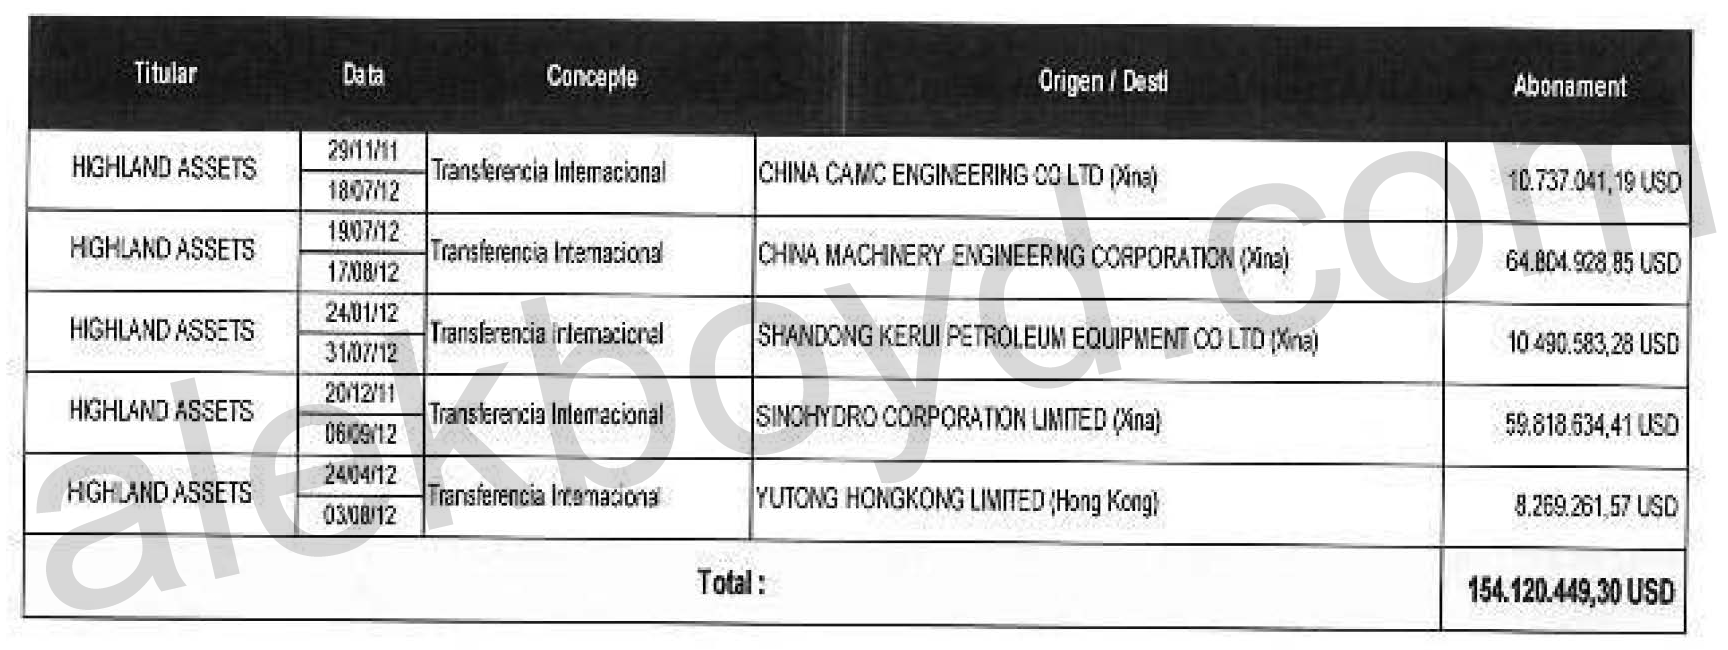 Chinese companies bribe payments to Diego Salazar